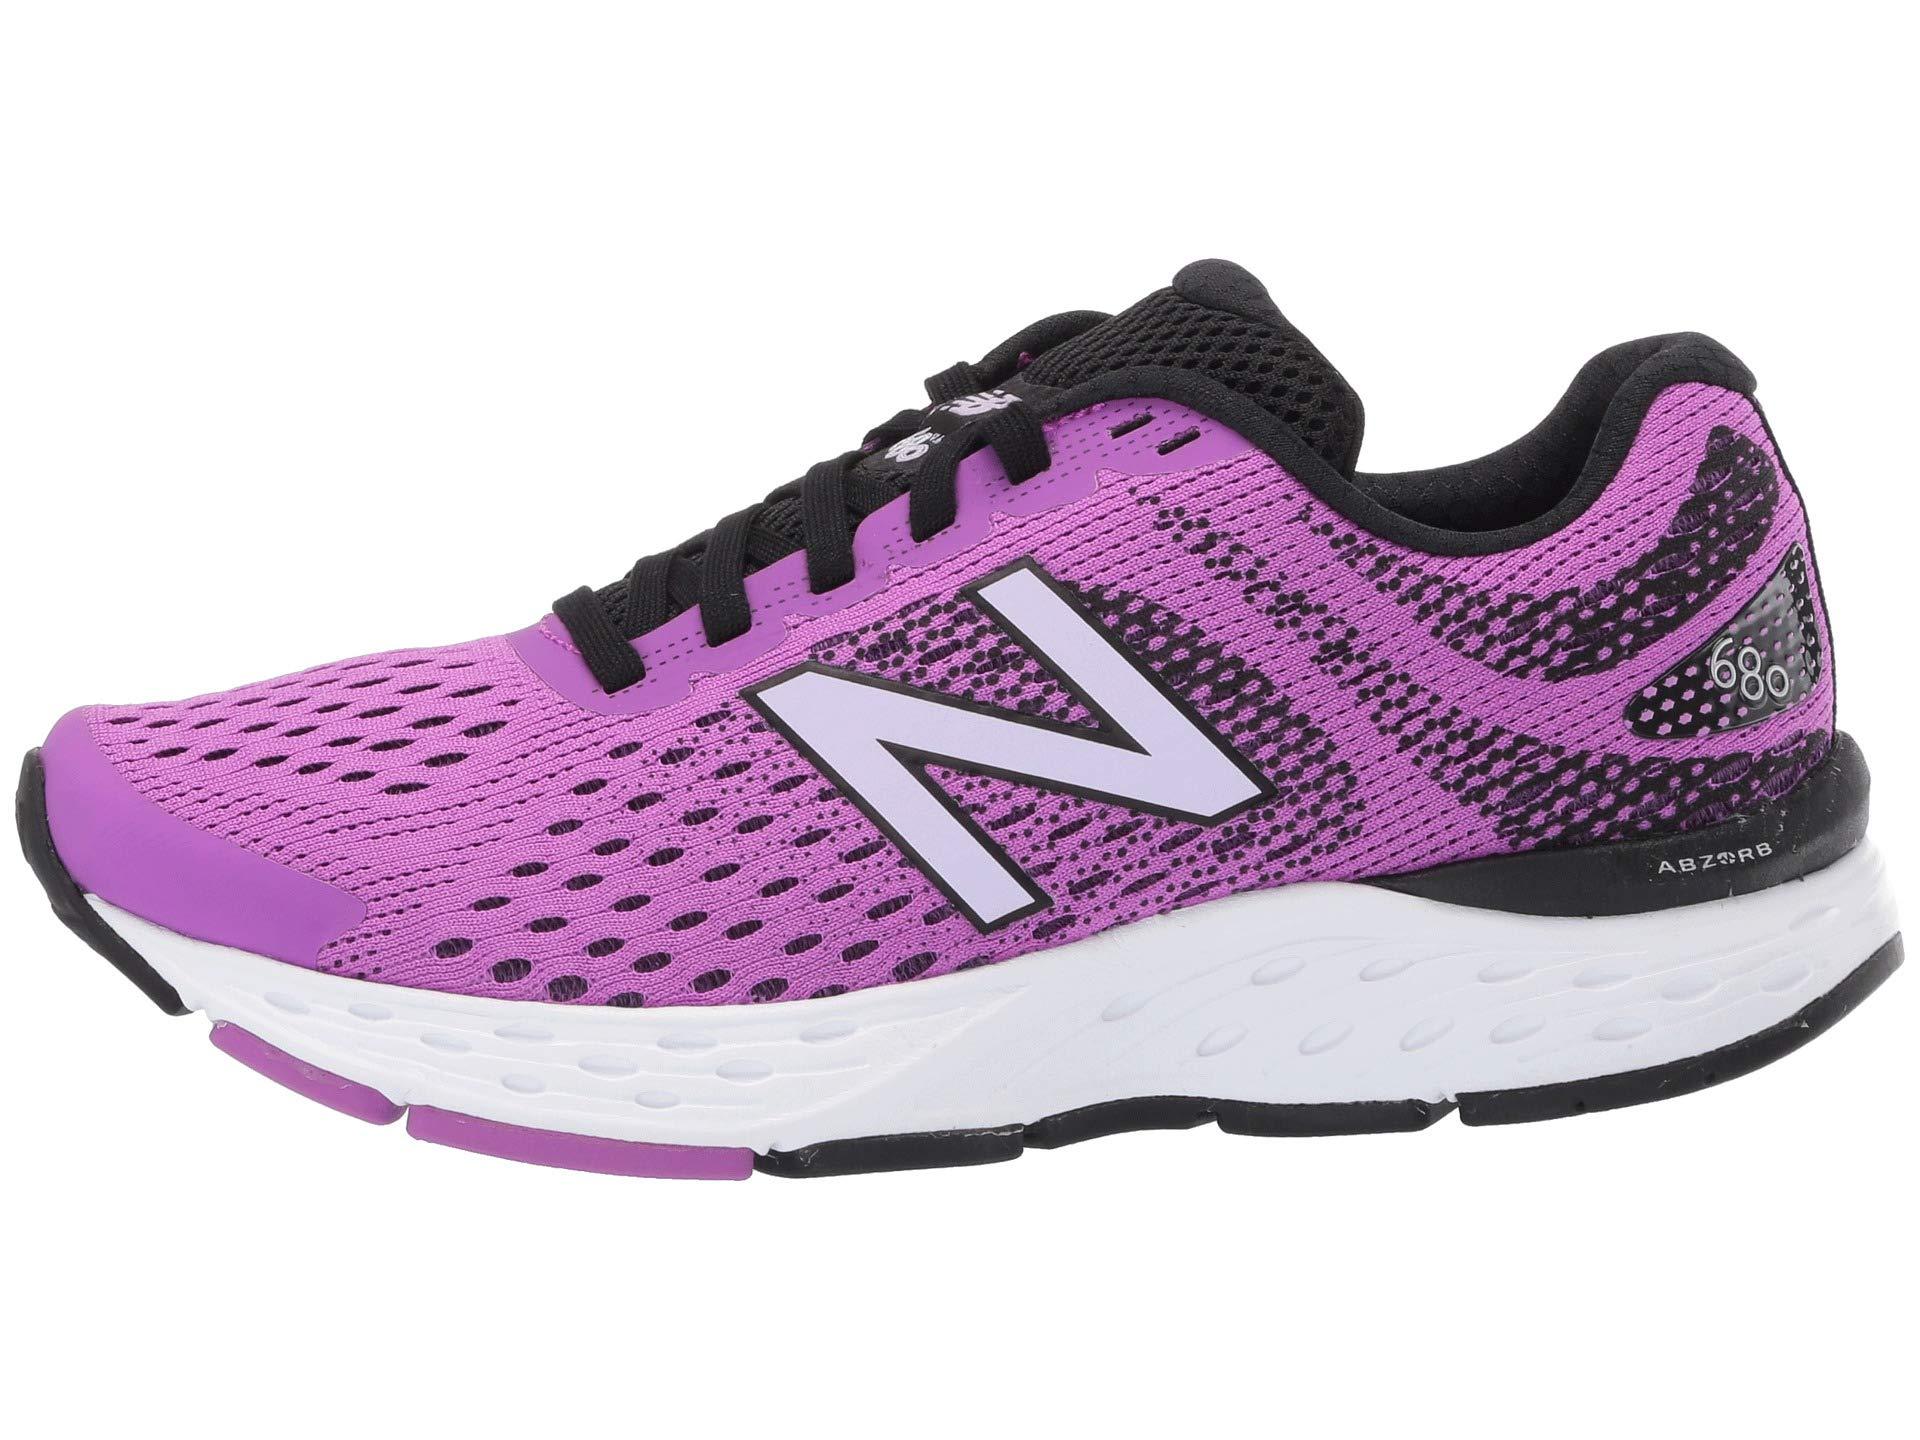 new balance 680 homme violet| Enjoy free shipping | www.ilcascinone.com